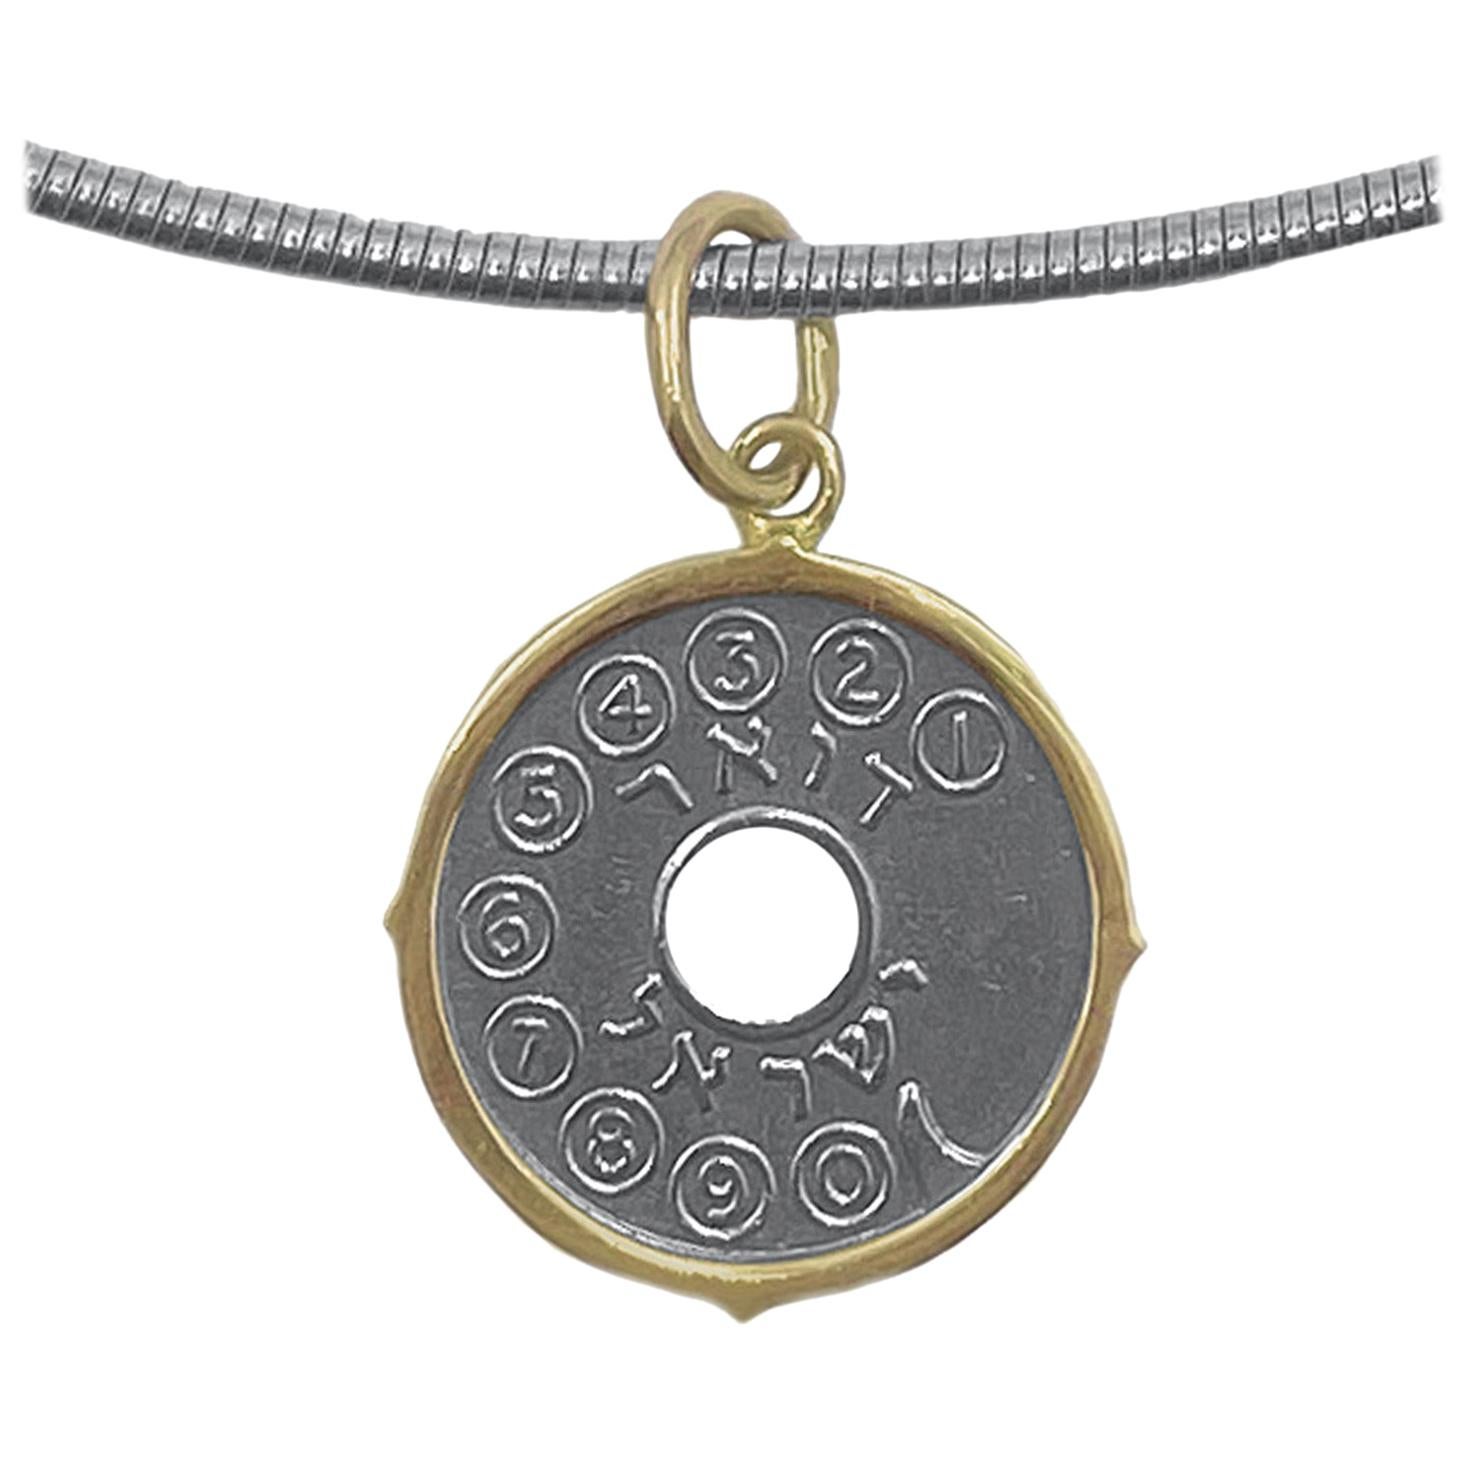 Asimon Phone Token Pendant Set in Gold on Steel Chain with Gold Hardware For Sale